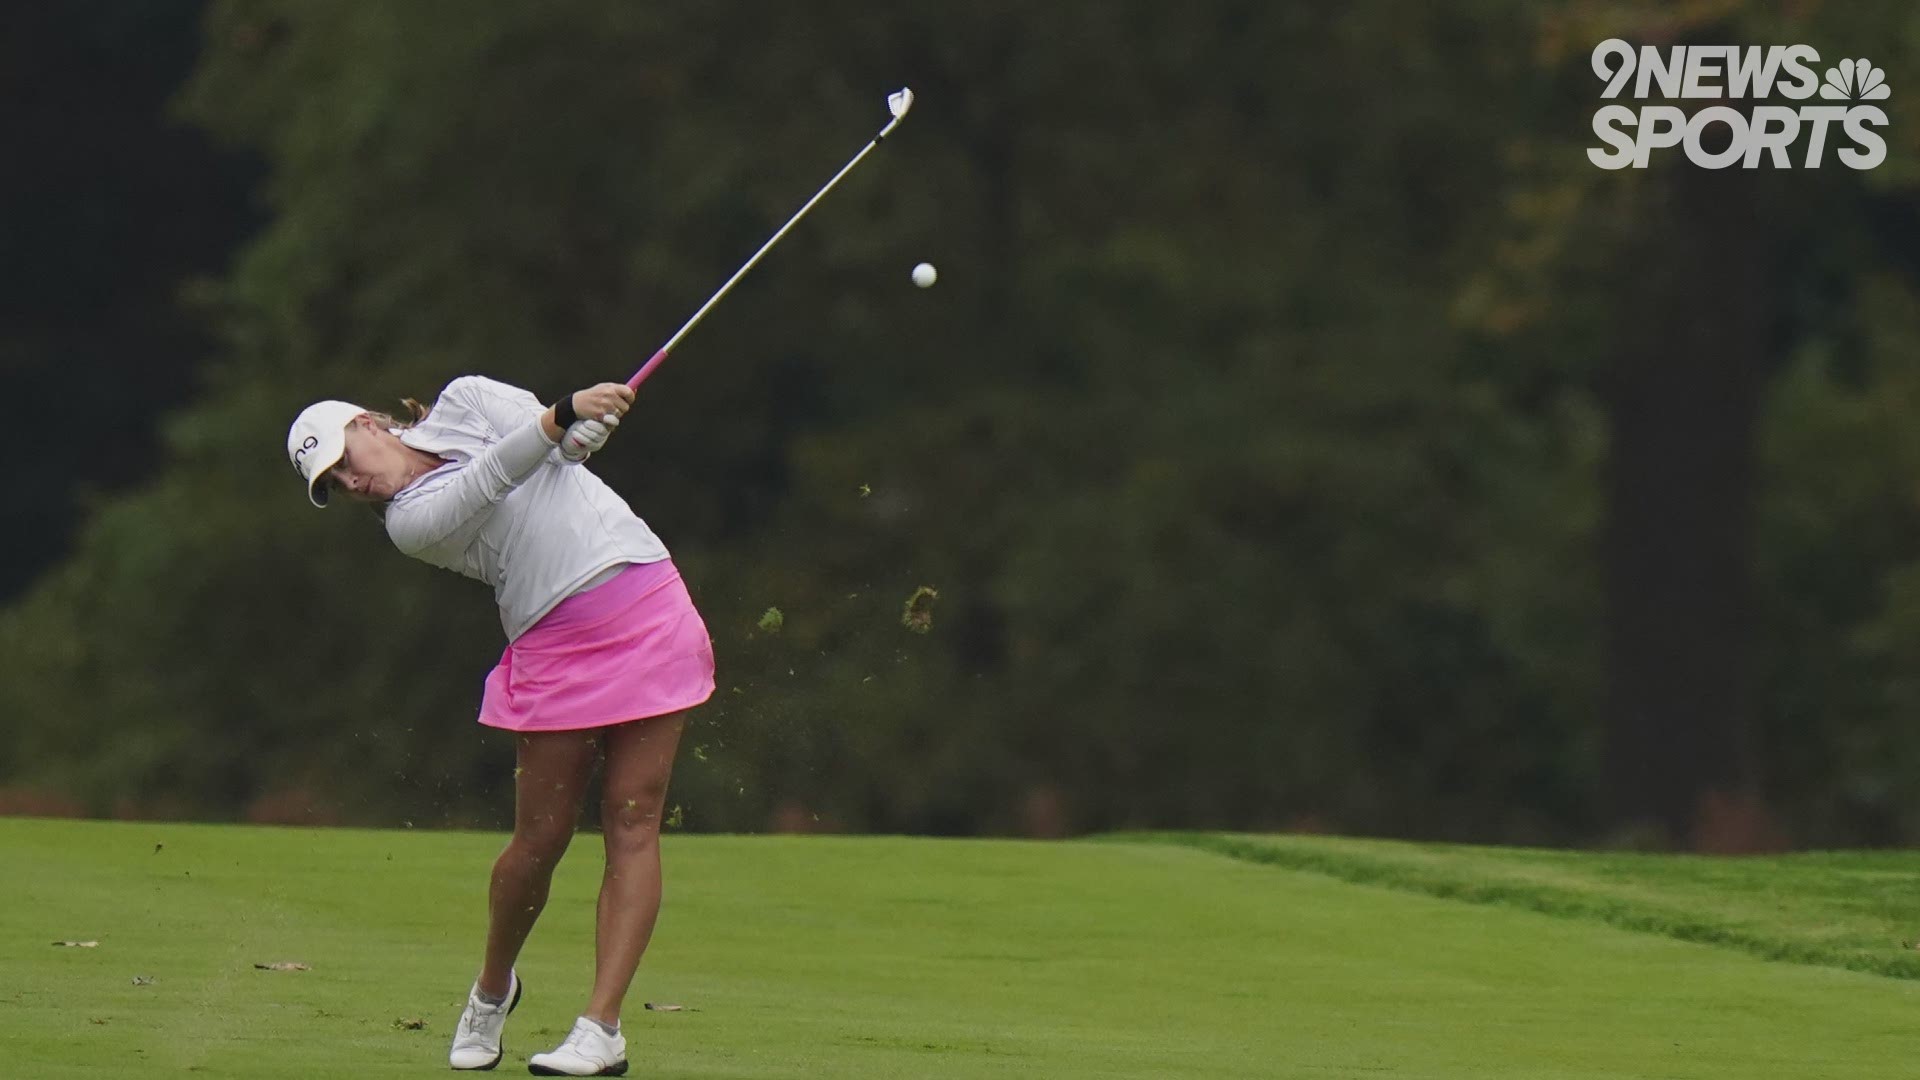 After winning her first professional event in July, the Colorado Women’s Open, Kupcho is looking to finish the year 2020 with her first major championship.